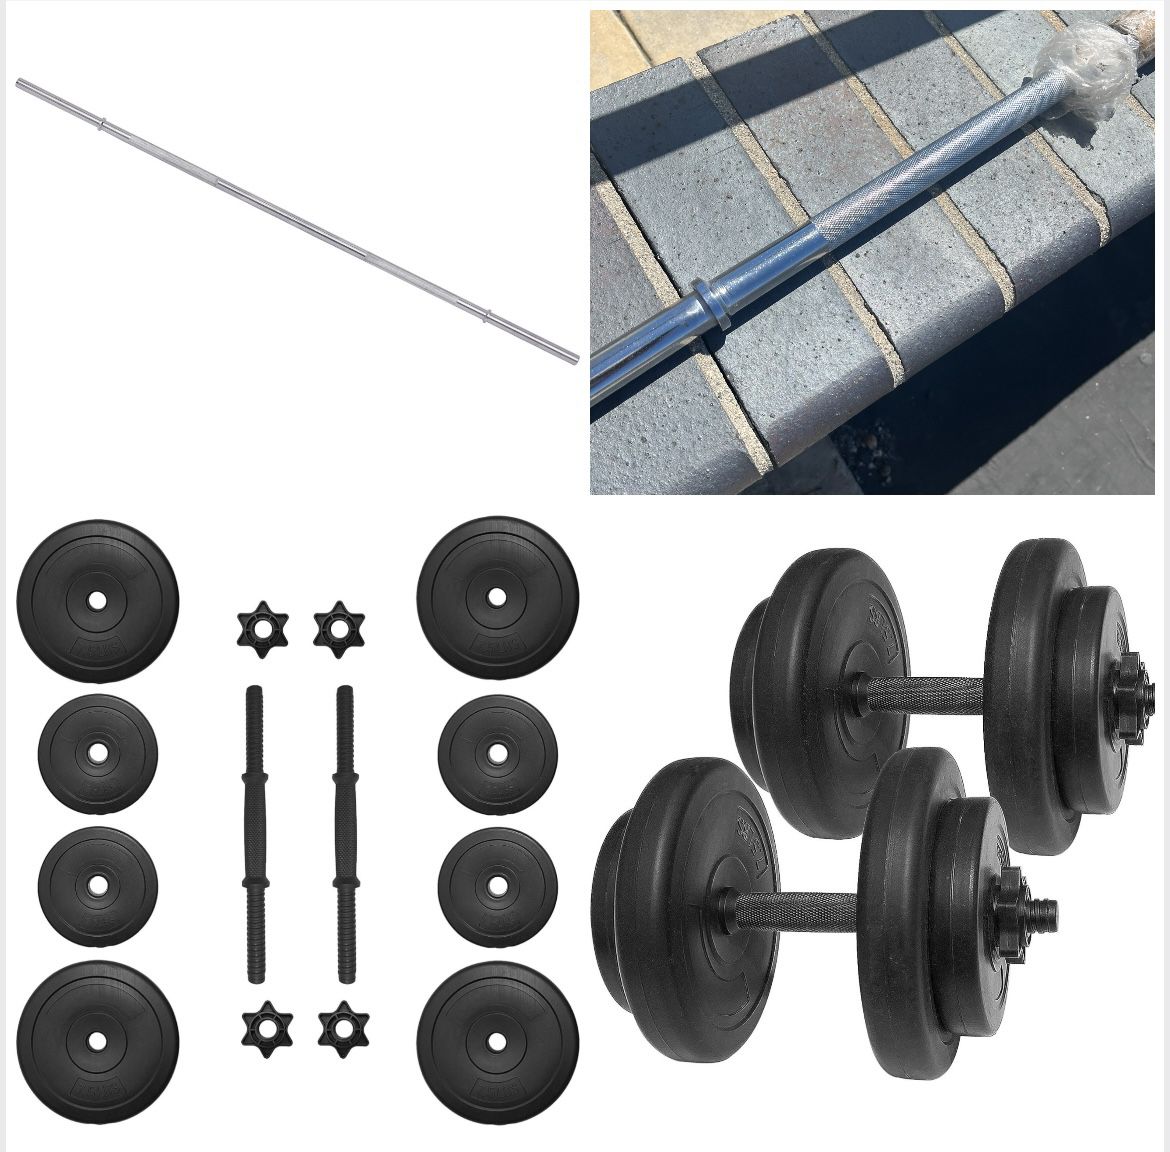 5ft. Standard 300lb capacity Barbell /4-20lb Adjustable Dumbbells(80lbs Of Weight)